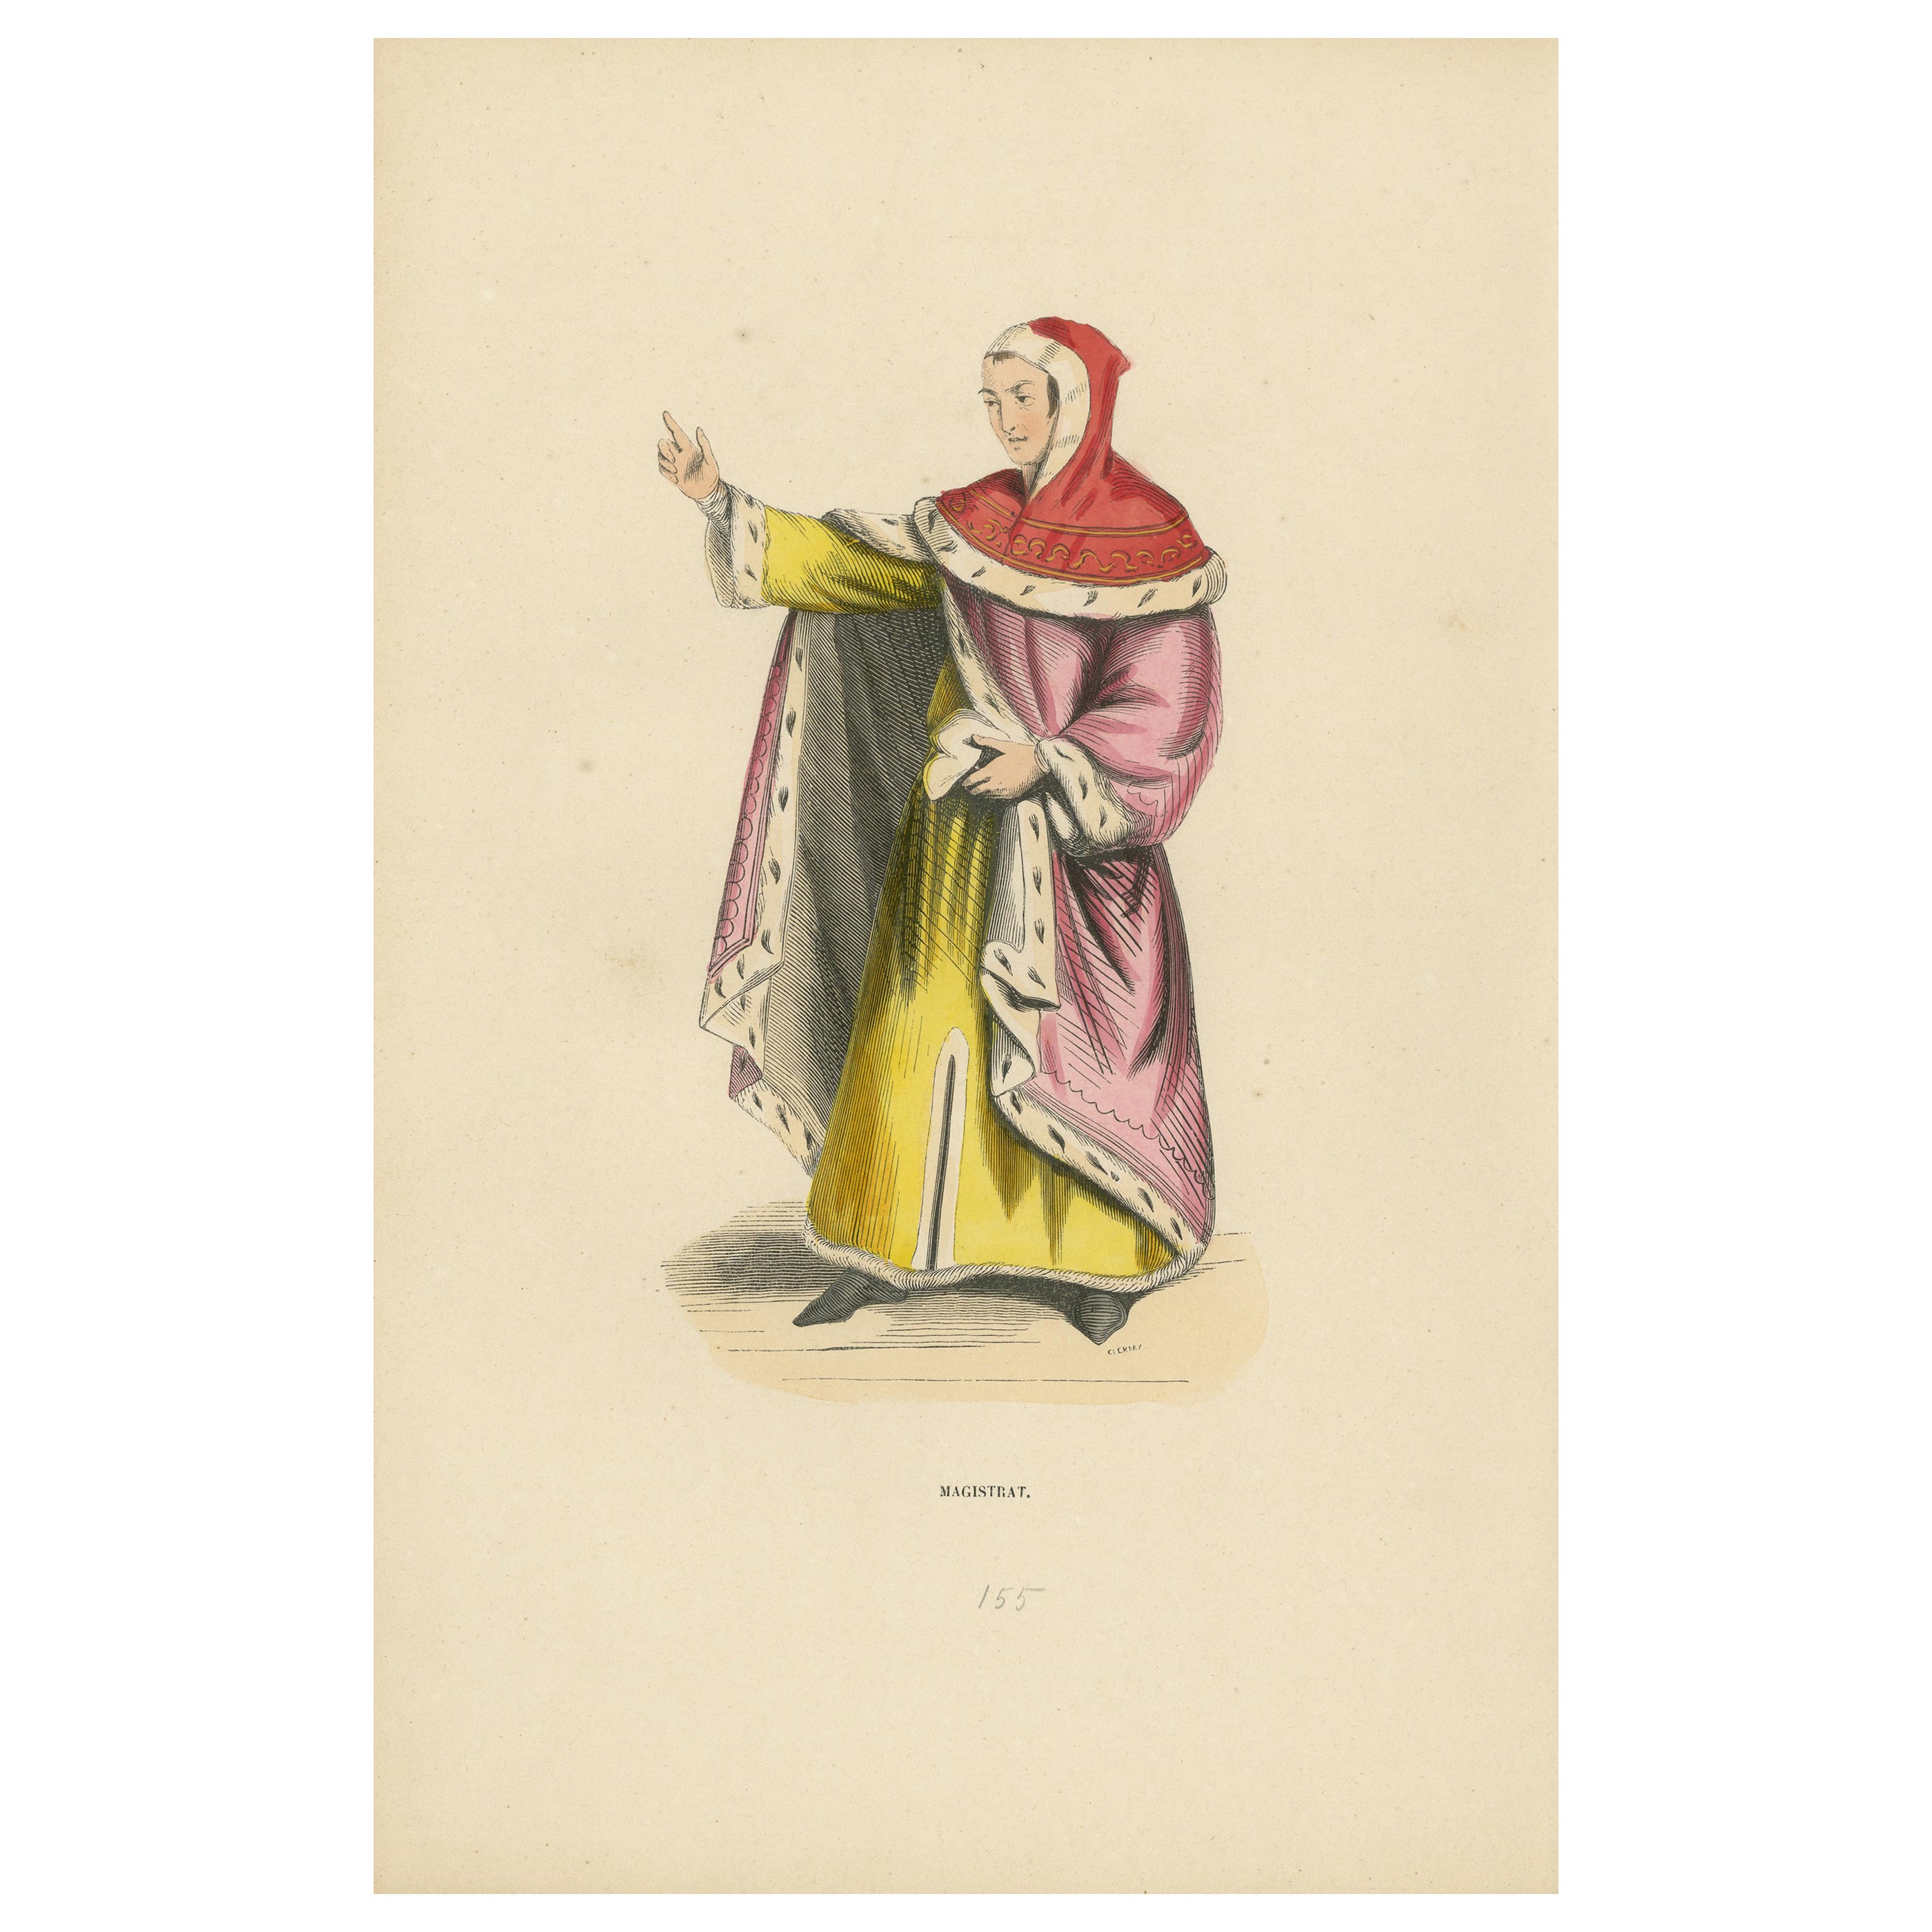 The Esteemed Jurist: A Magistrate's Robe in an Original Lithograph, 1847 For Sale